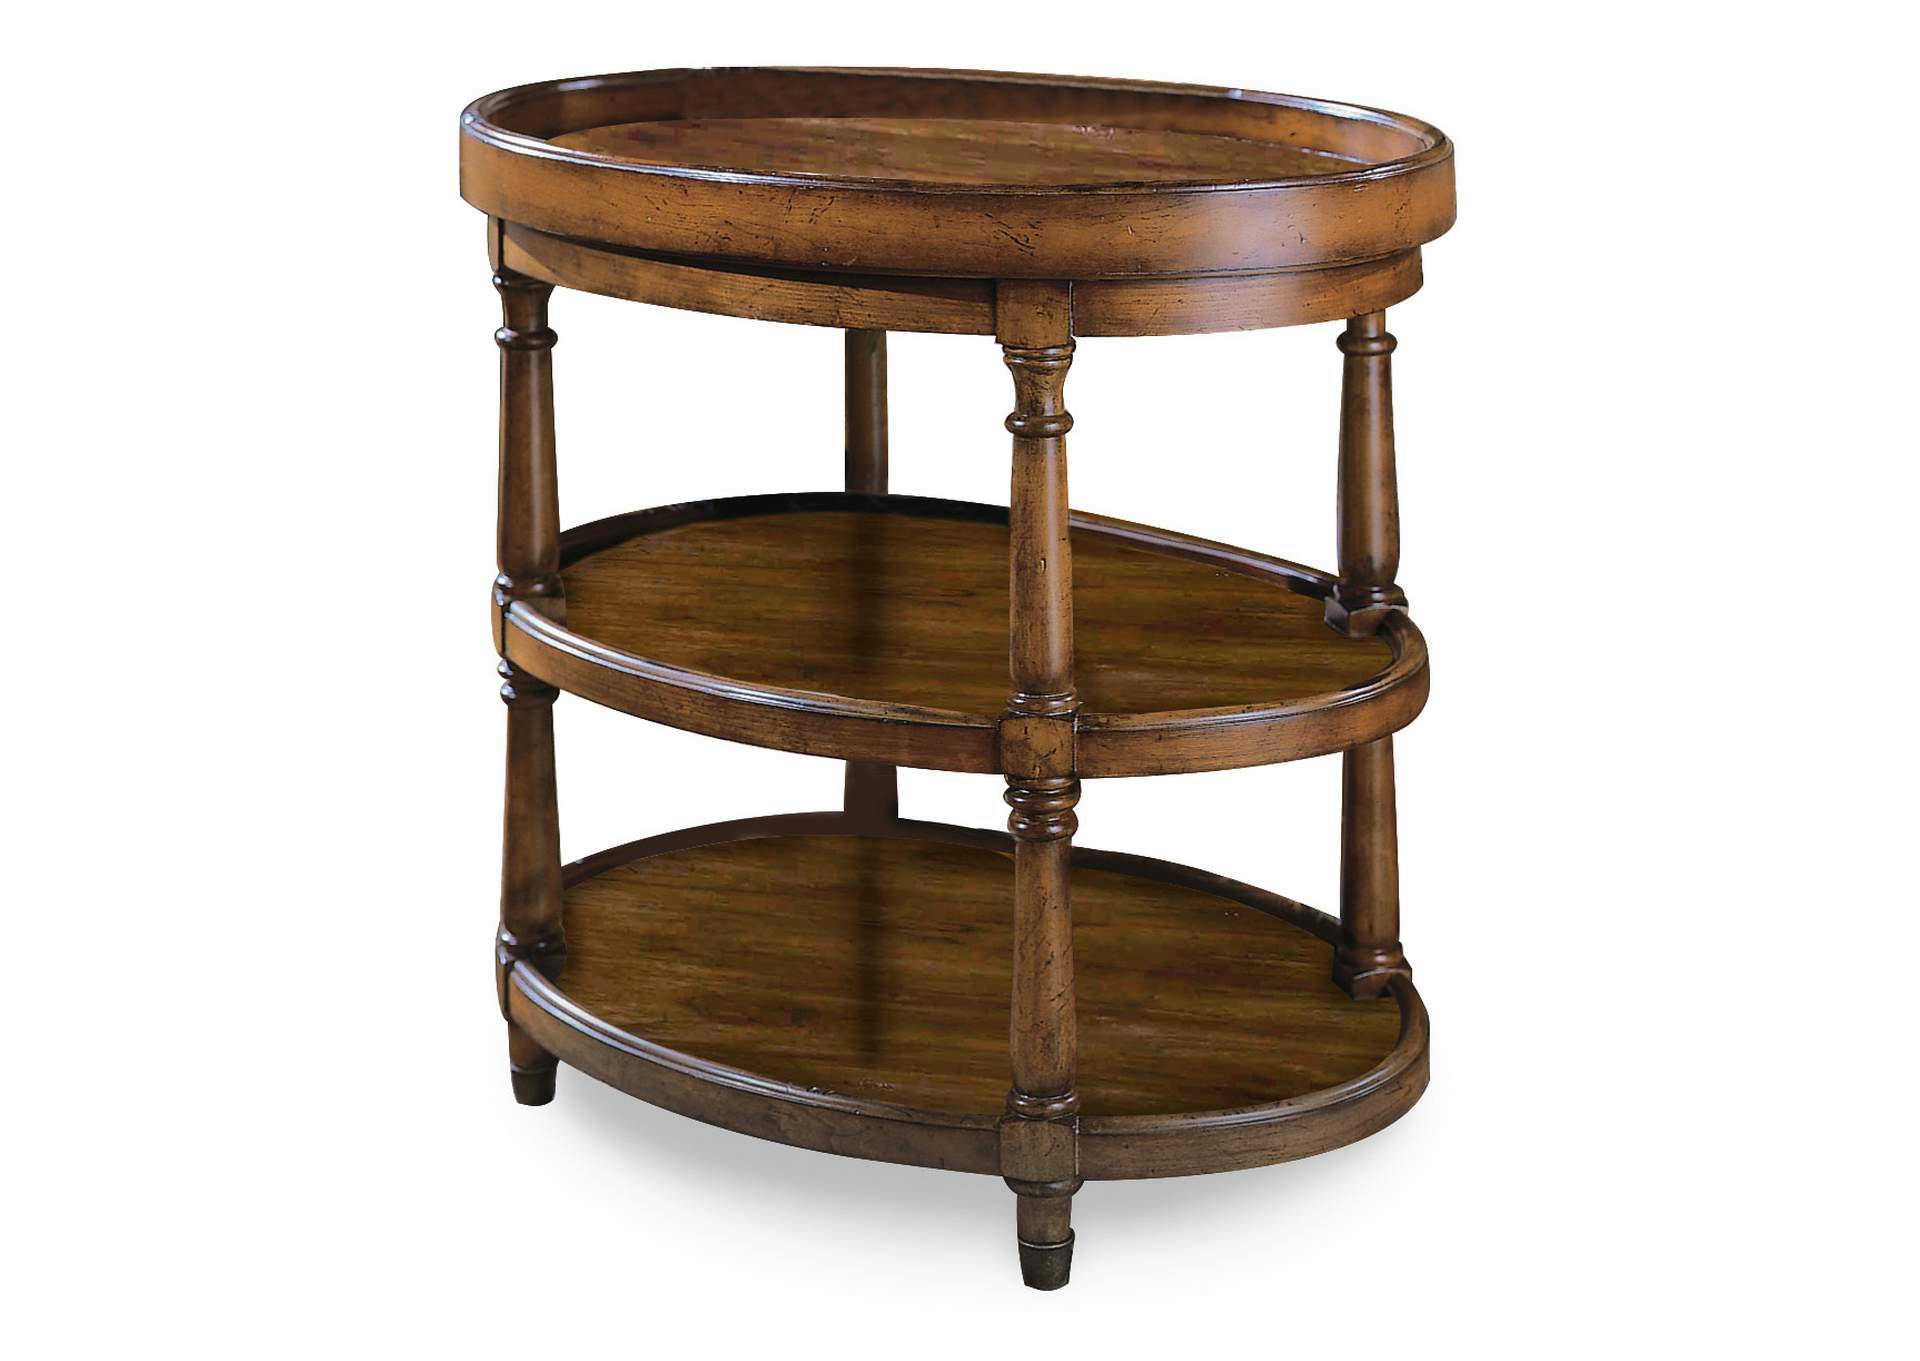 Oval Accent Table,Hooker Furniture